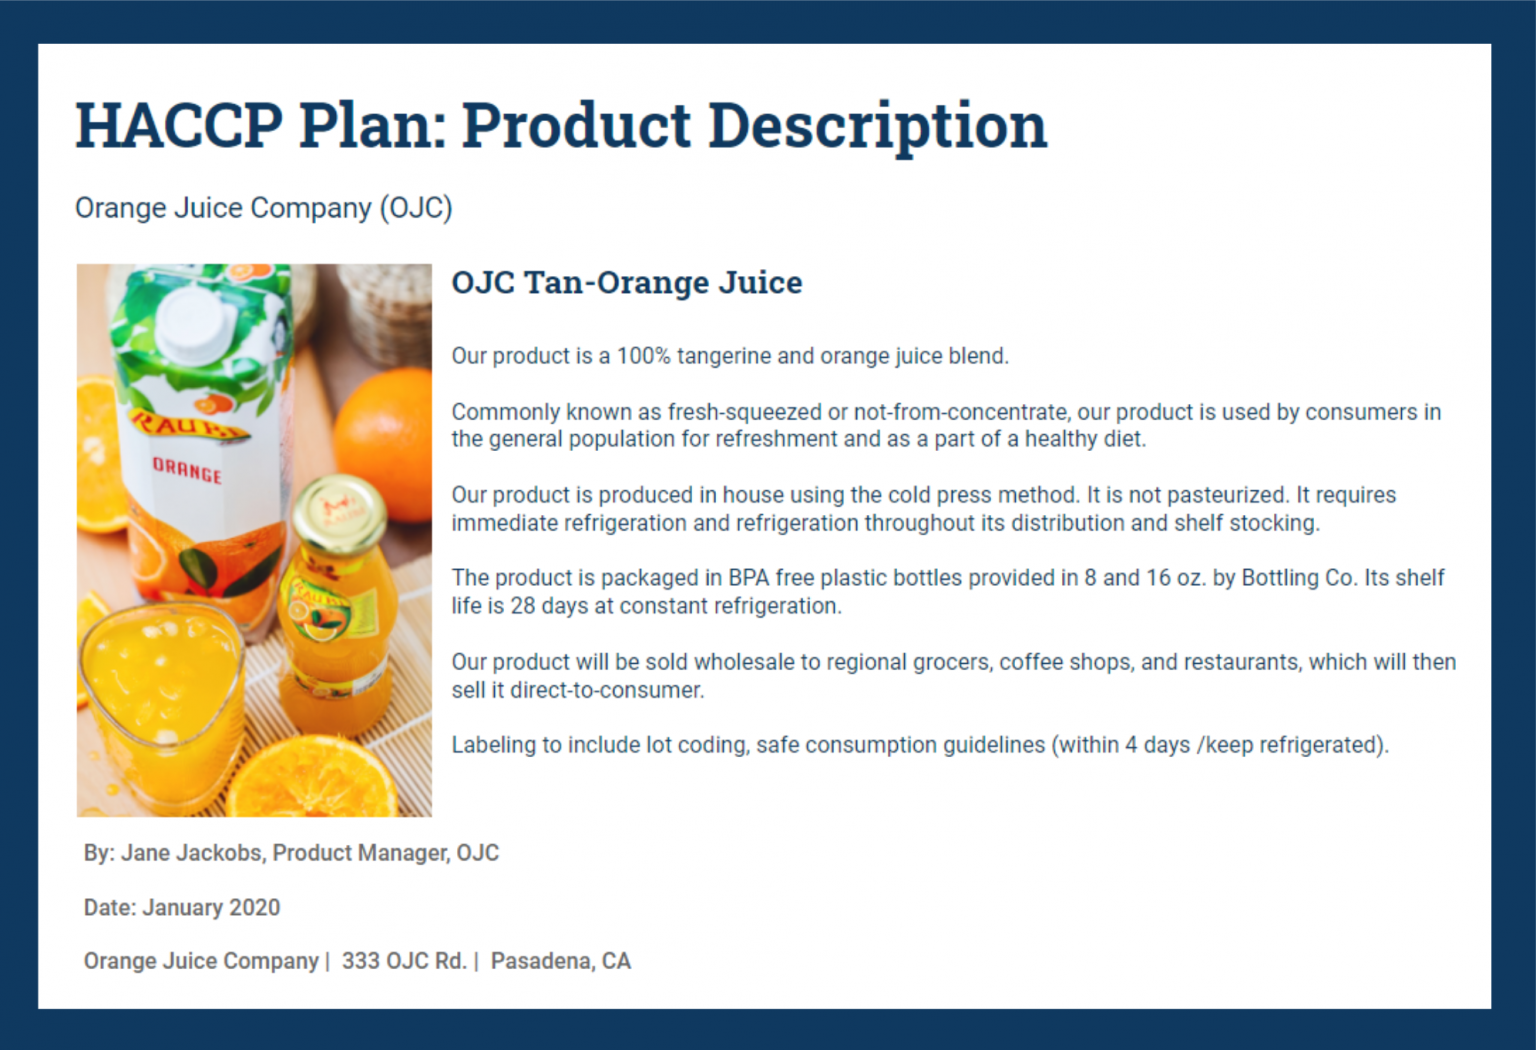 completing-your-haccp-plan-template-a-step-by-step-guide-safesite